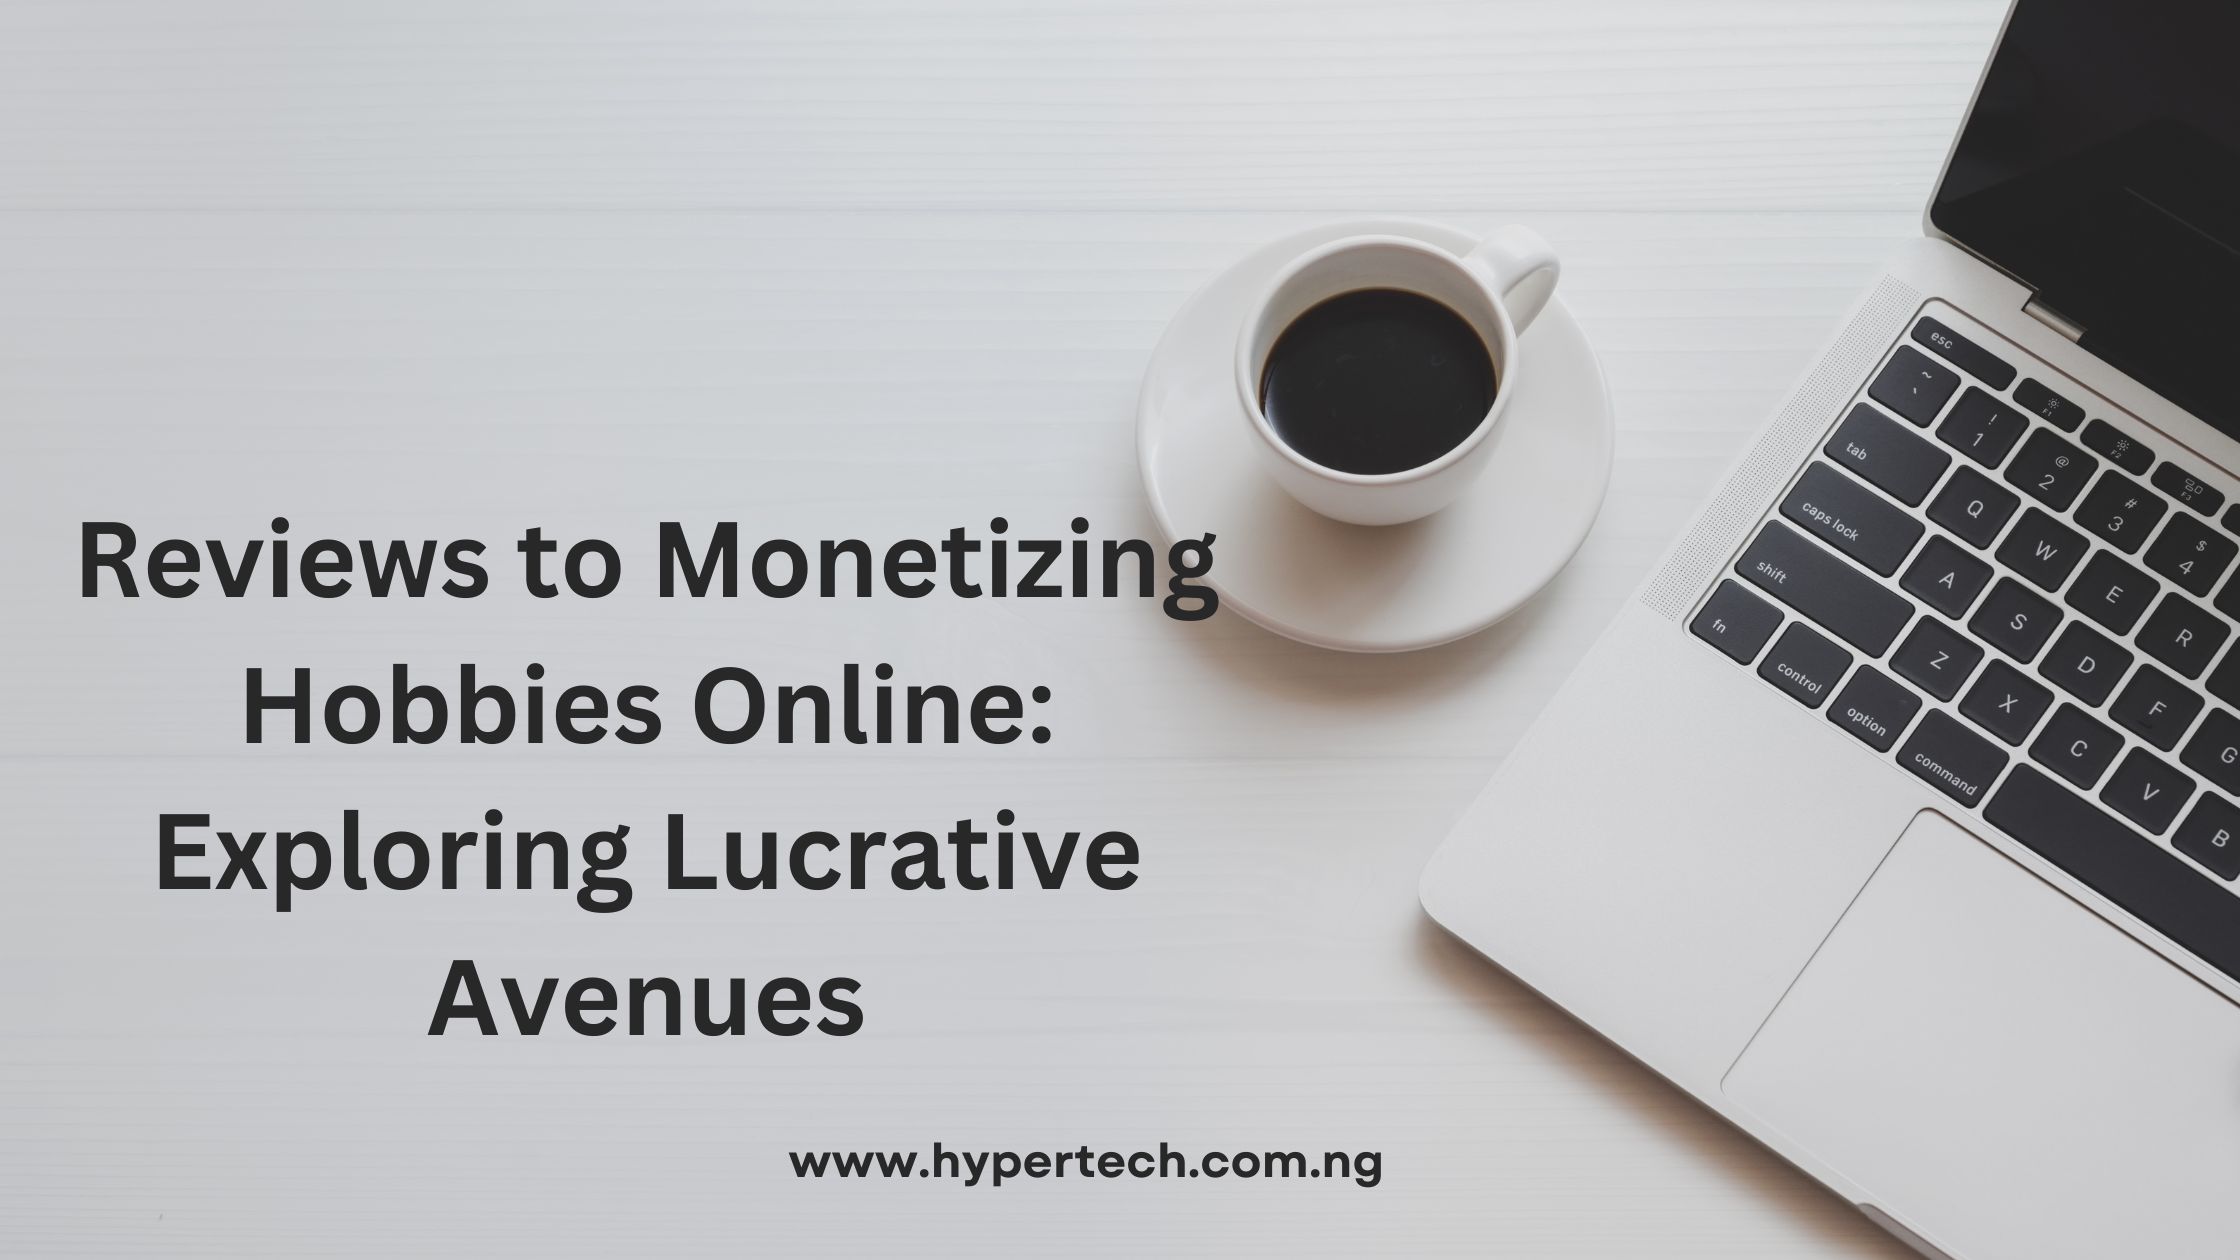 Reviews to Monetizing hobbies online